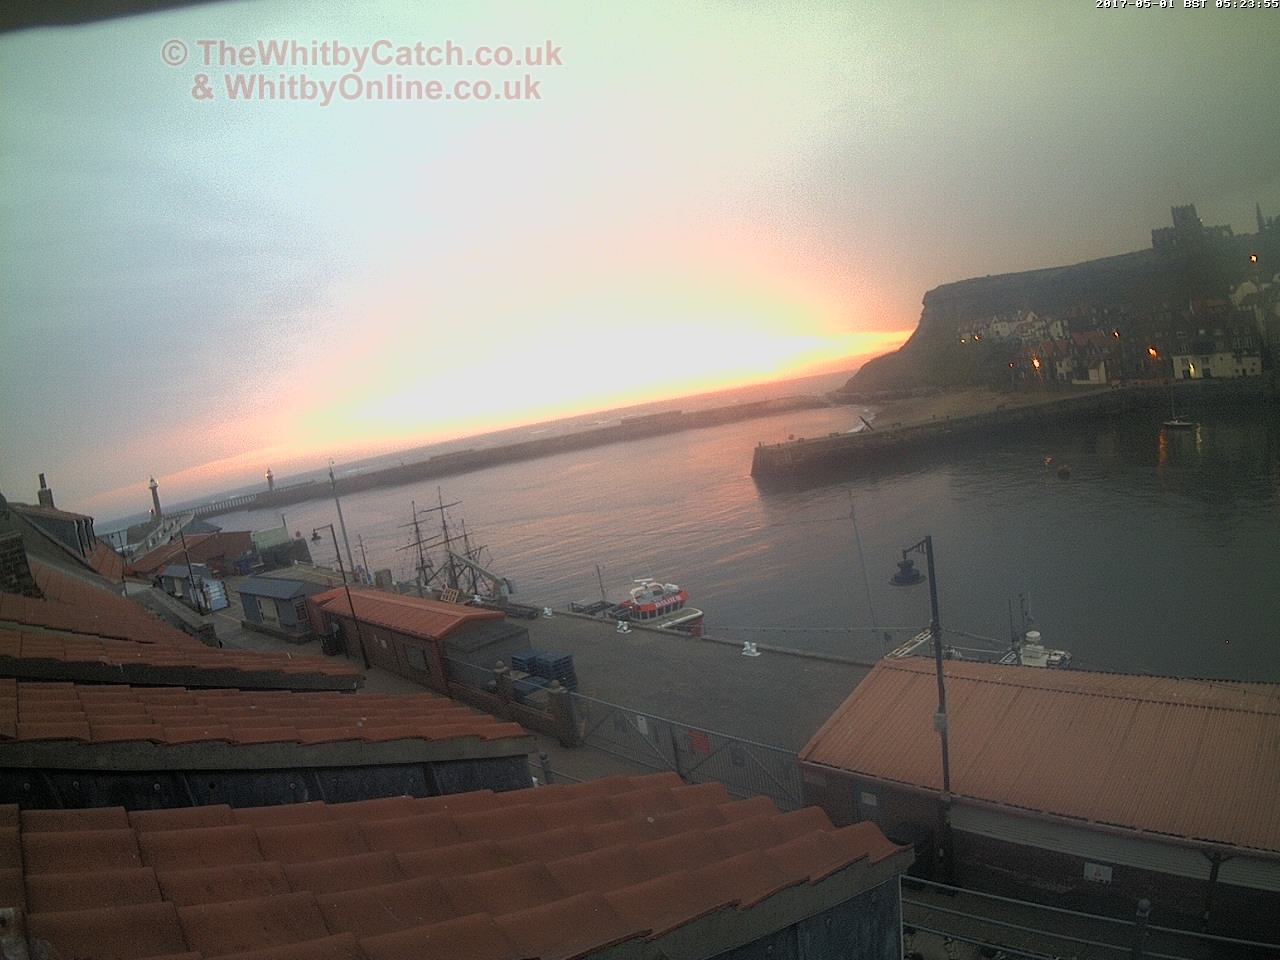 Whitby Mon 1st May 2017 05:24.